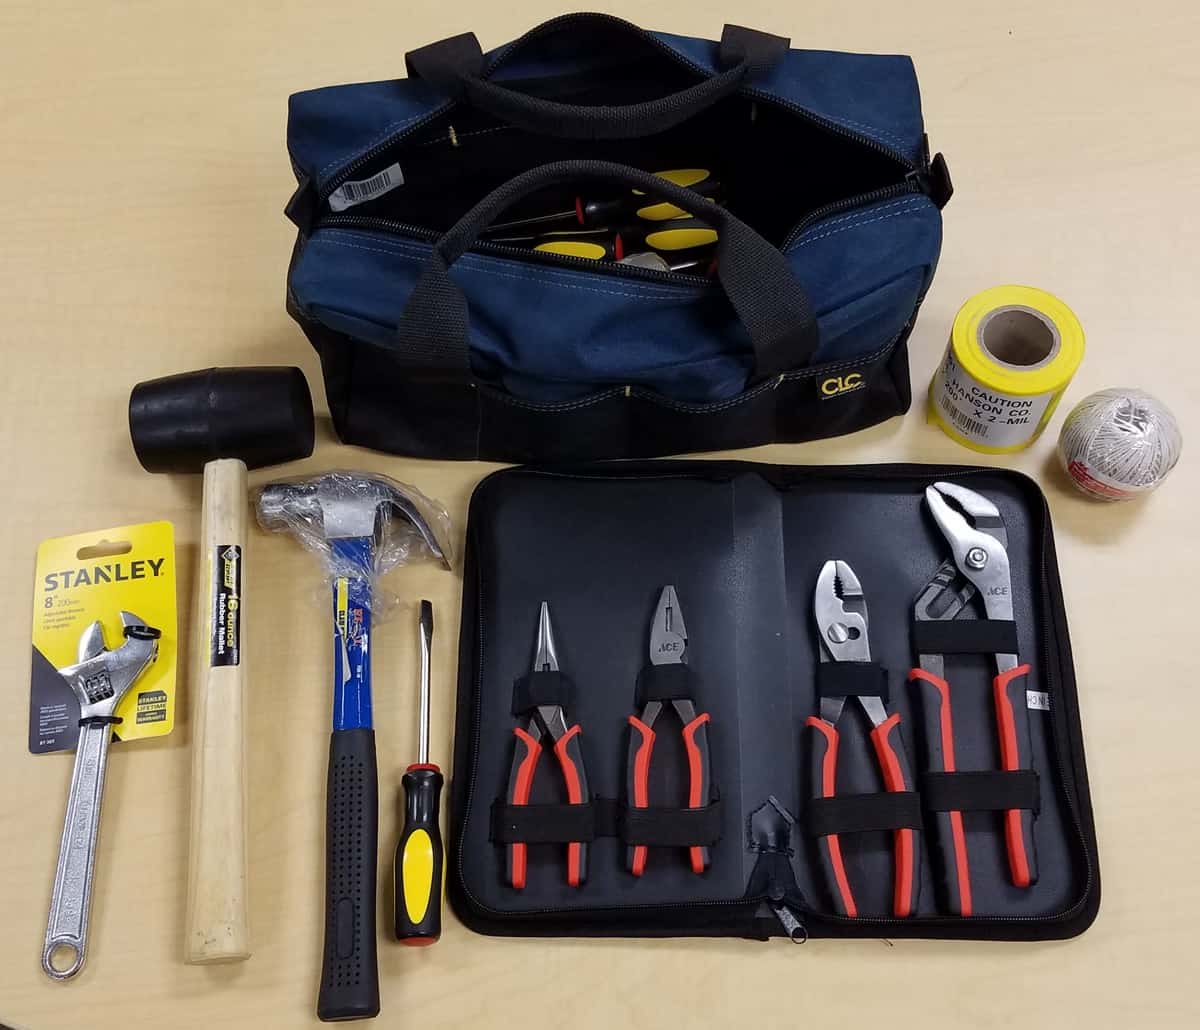 Pictured is a blue bag containing tools with items set out in front of it including a wrench, mallet, hammer, screwdriver, pliers, caution tape, and wire (left to right).